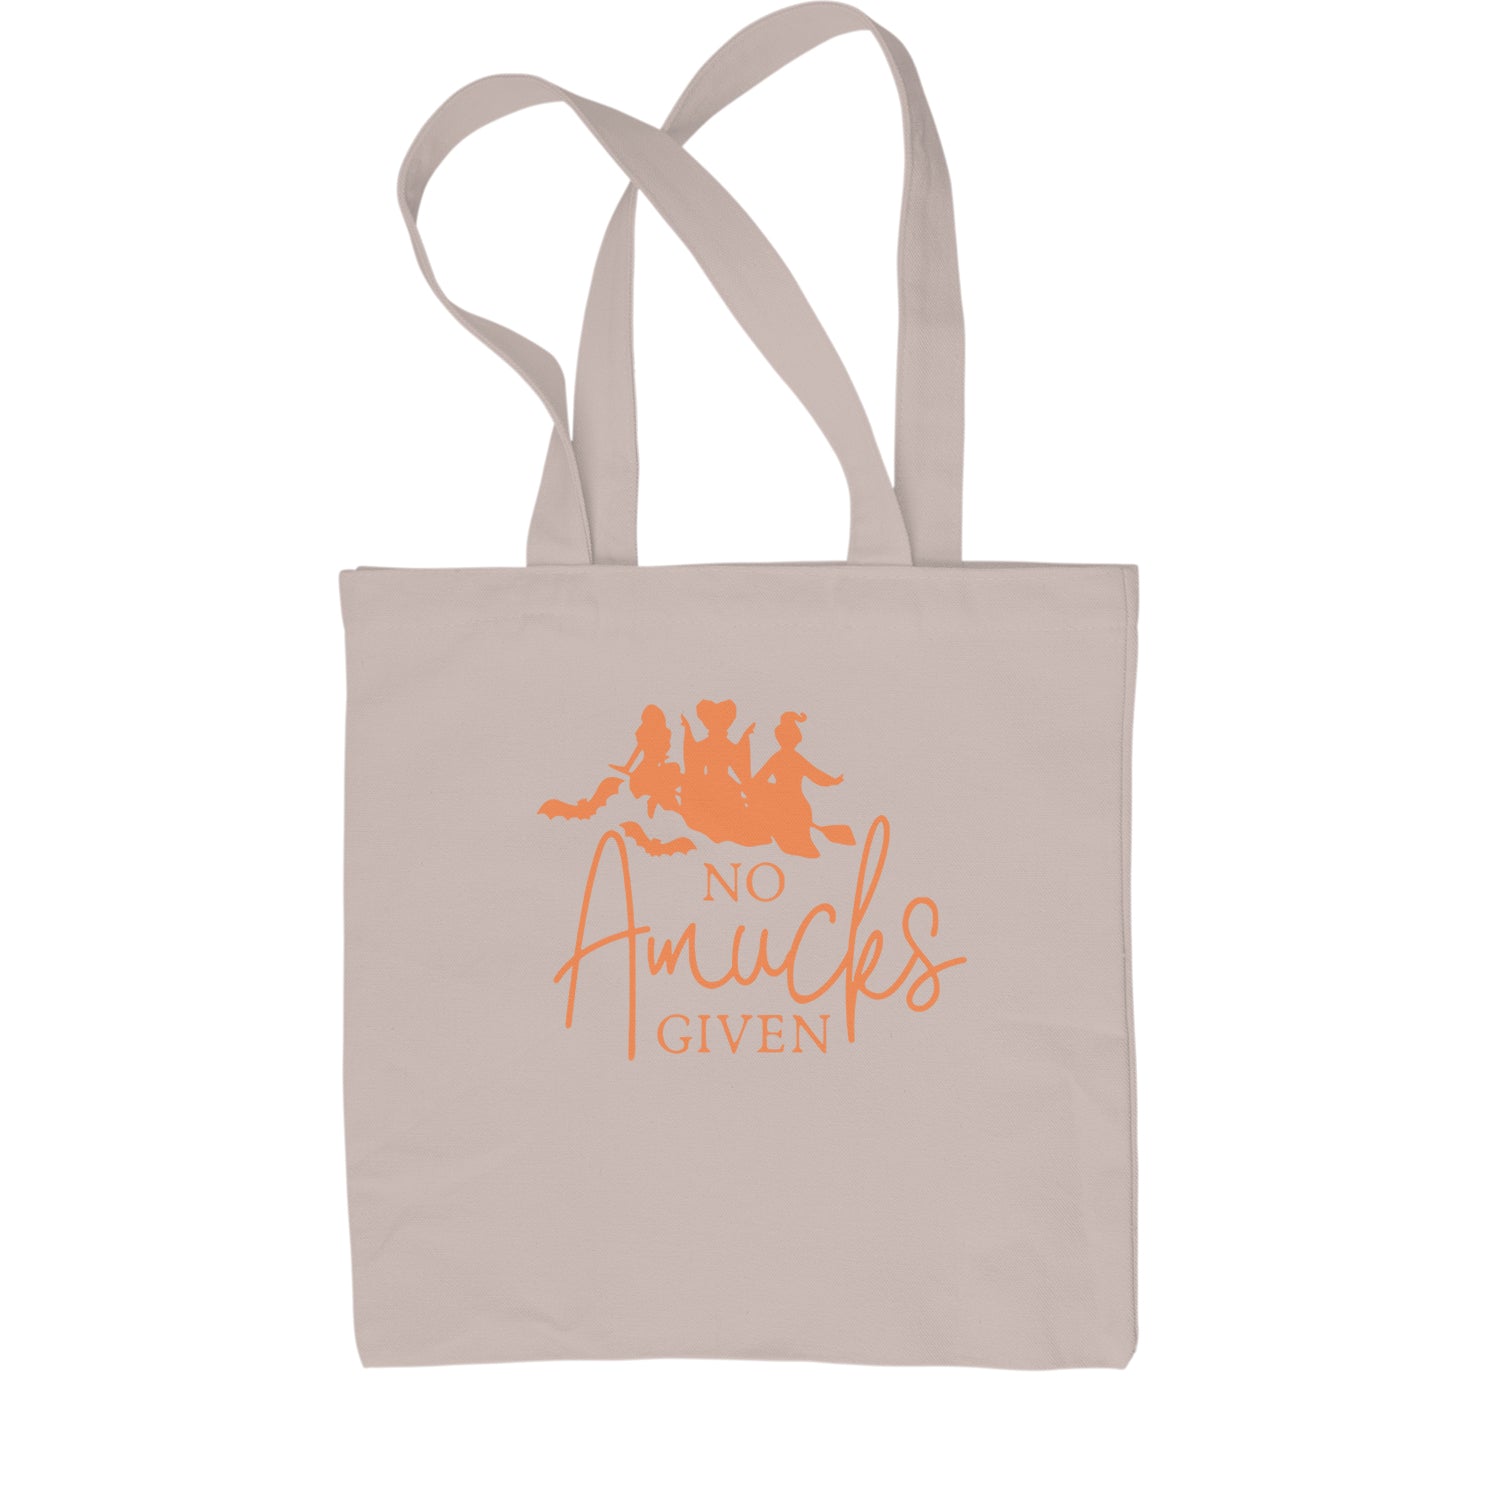 No Amucks Given Hocus Pocus Shopping Tote Bag descendants, enchanted, eve, hallows, hocus, or, pocus, sanderson, sisters, treat, trick, witches by Expression Tees